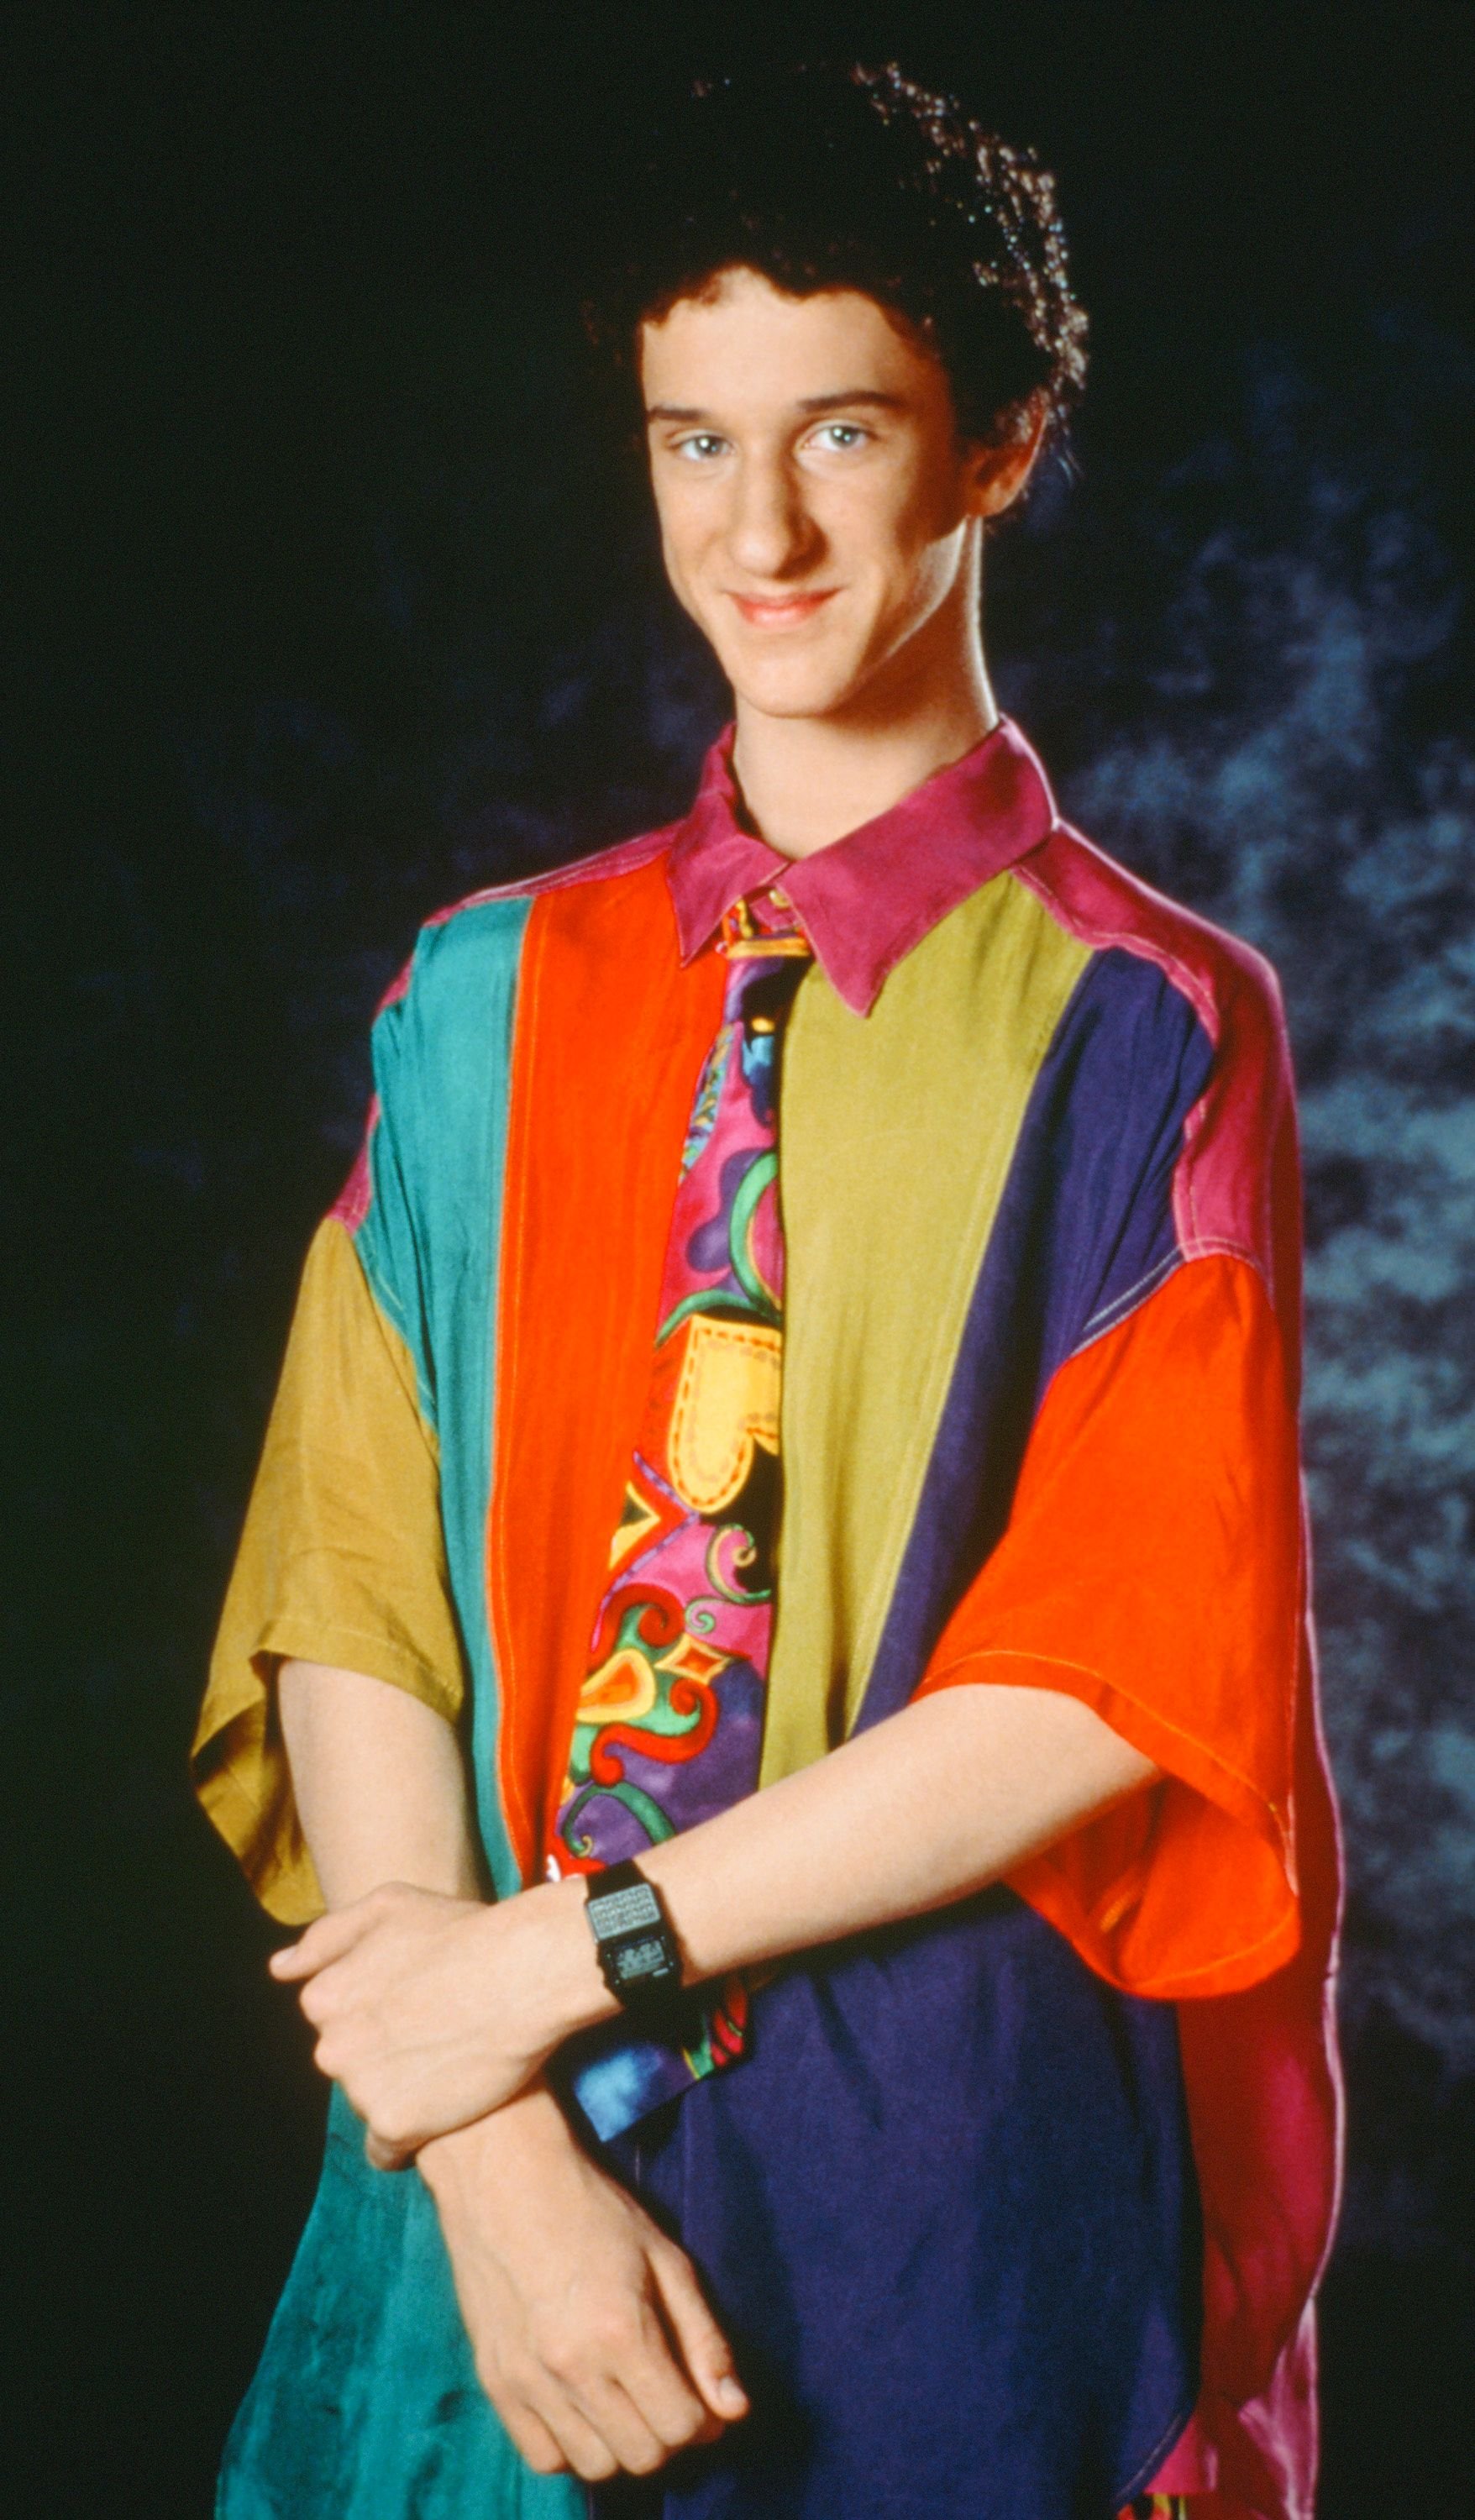 Dustin Diamond as Screech Powers IN "Saved By The Bell" | Source: Getty Images